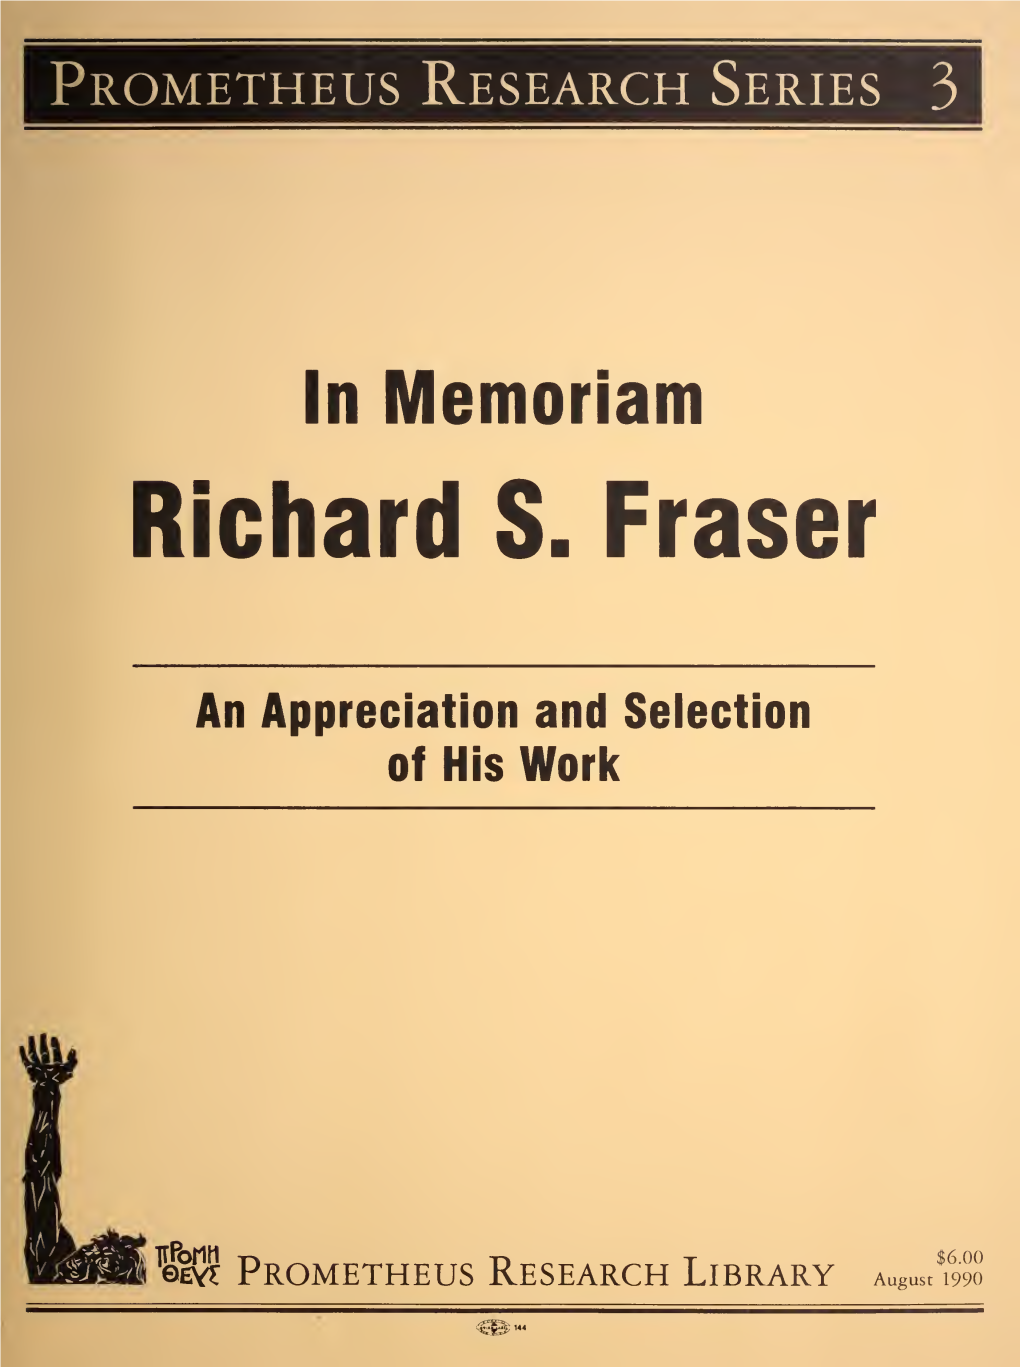 In Memoriam, Richard S. Fraser: Structure of Communist Parties, on the an Appreciation and Selection Methods and Content of Their Work of His Work